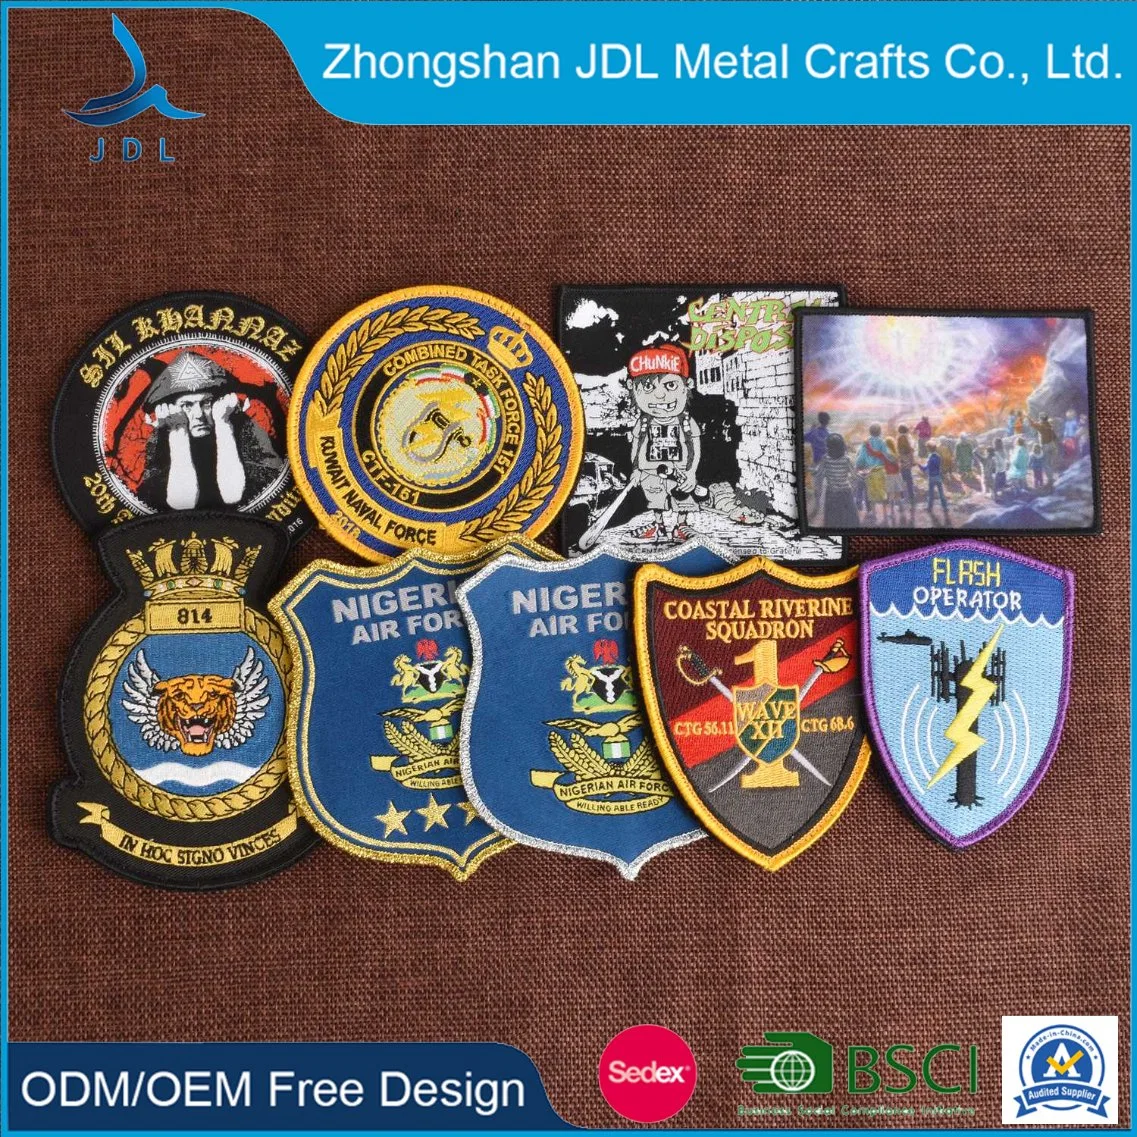 Personal Design Customized Wholesale/Supplier Embroidery Patch Garment Clothing Accessories Custom 3D Flat Fashion Apparel Textiles (91)